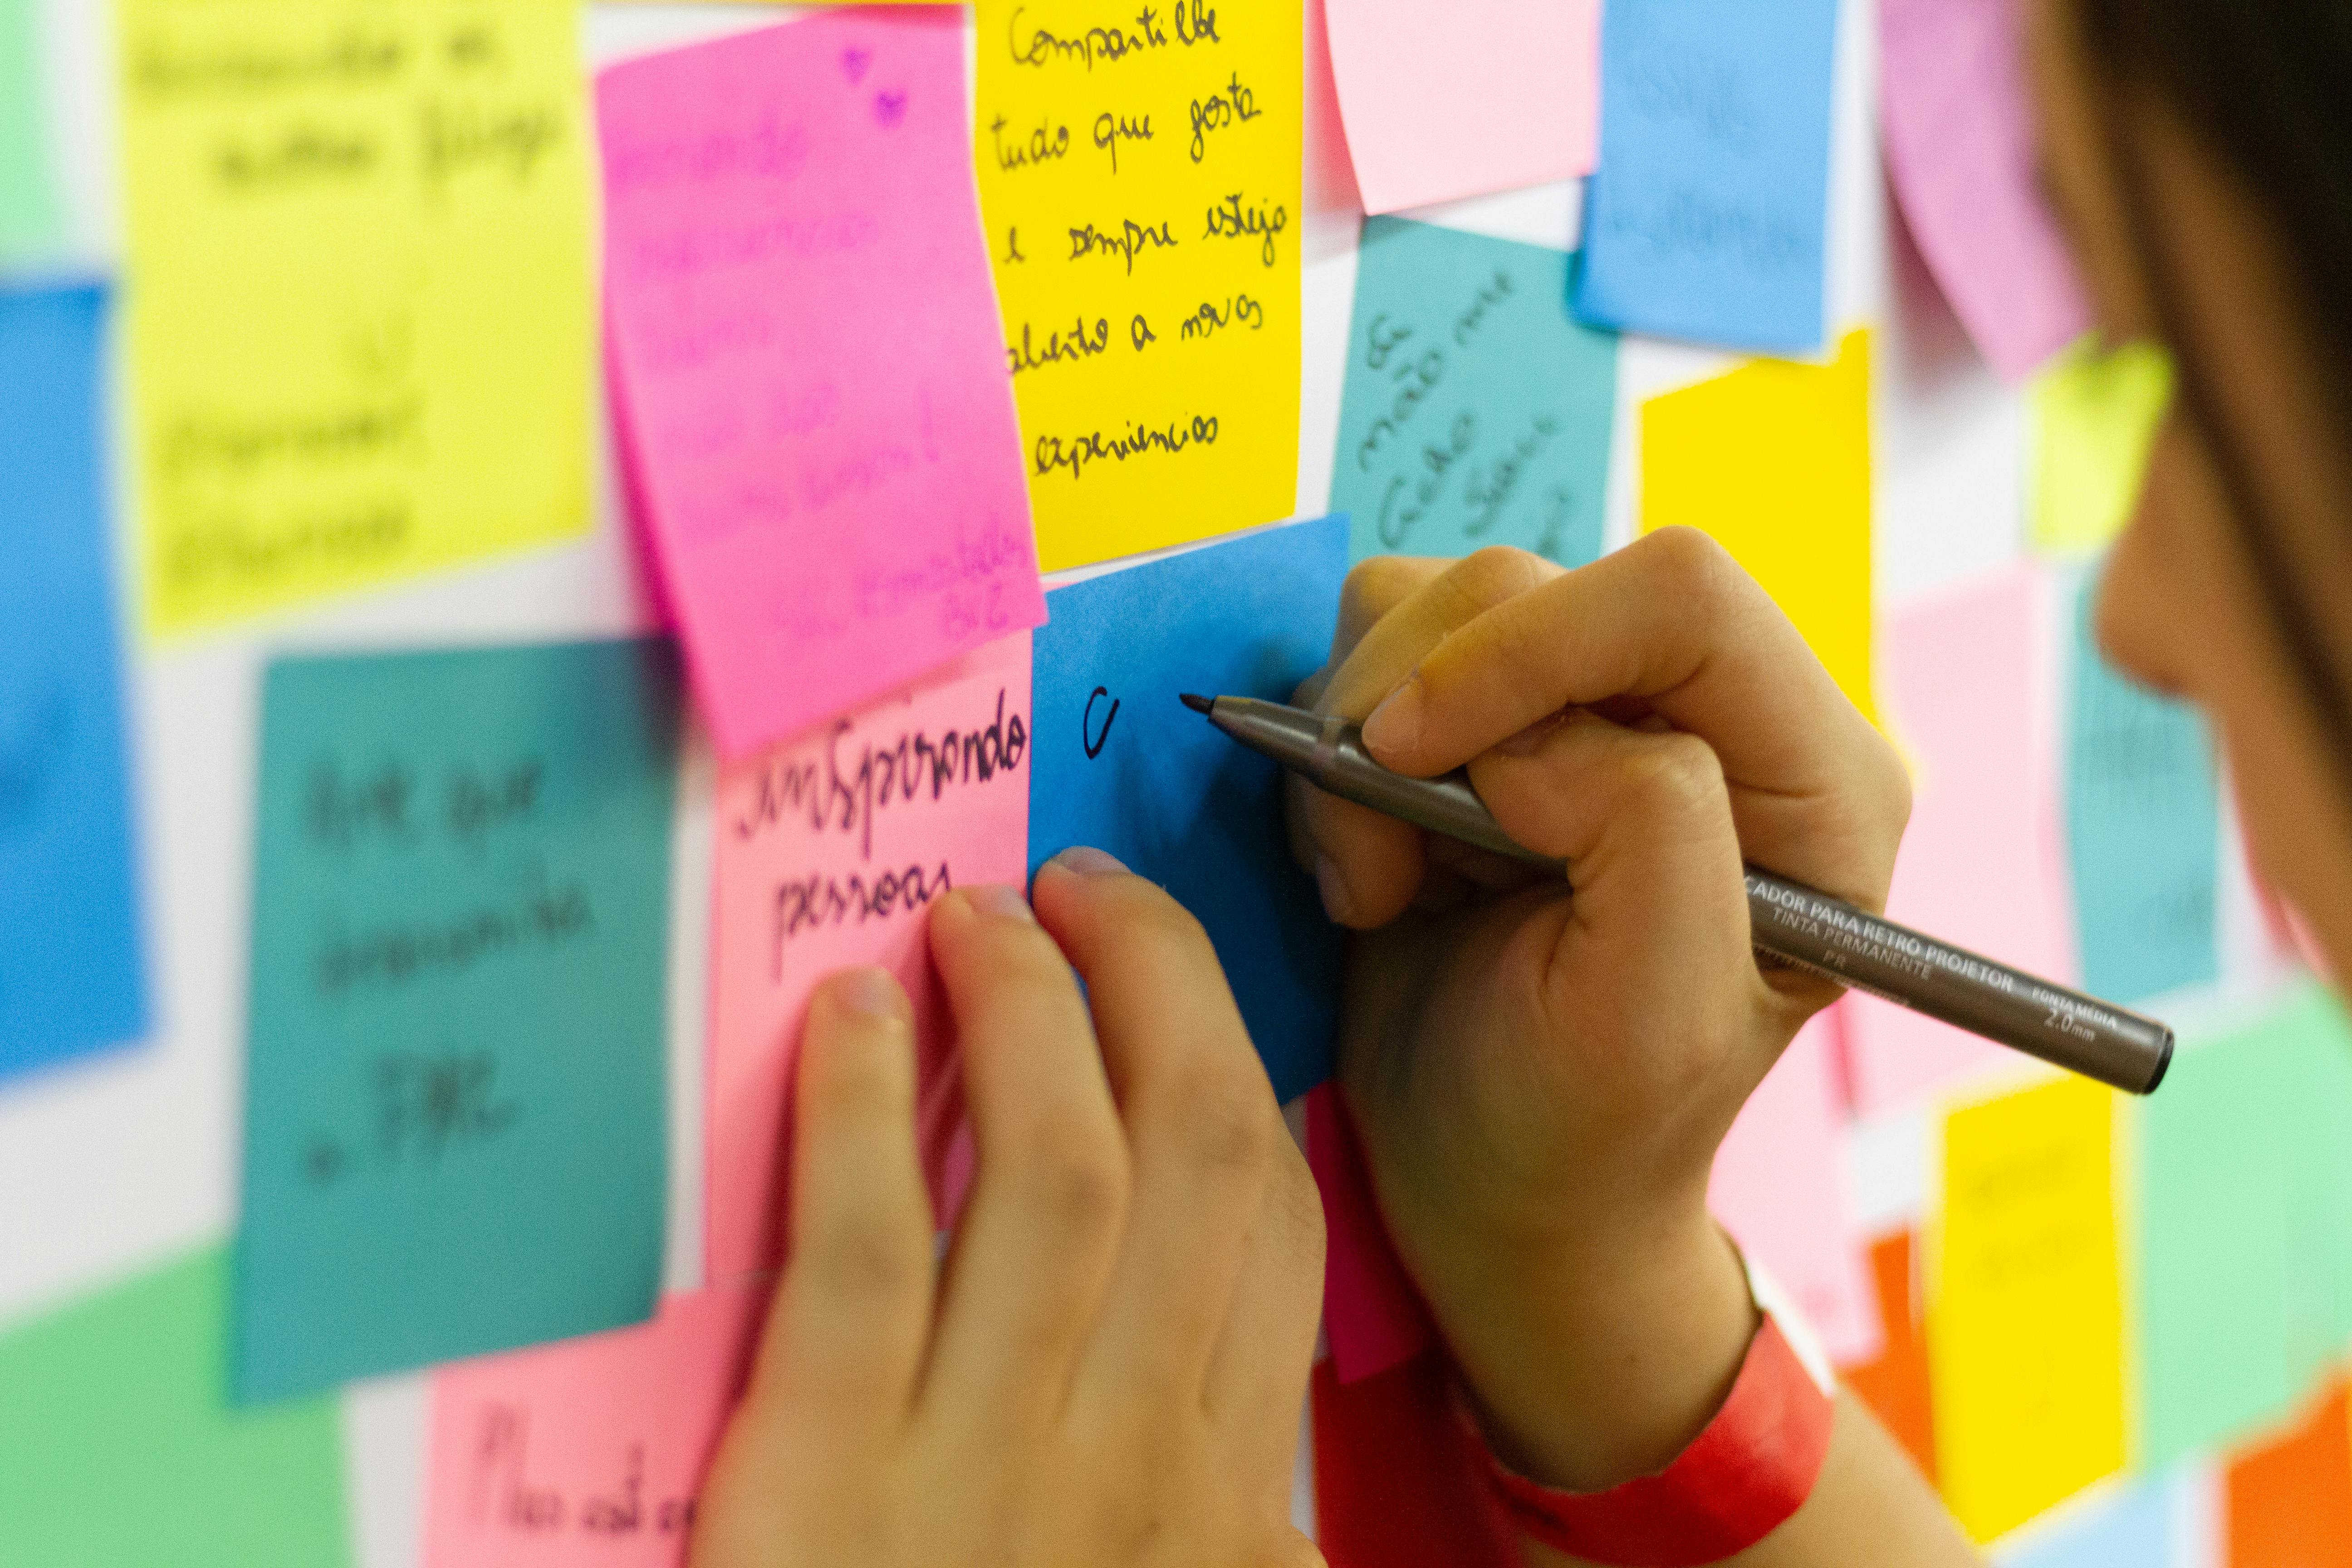 Post It Board Stock Photos, Images and Backgrounds for Free Download